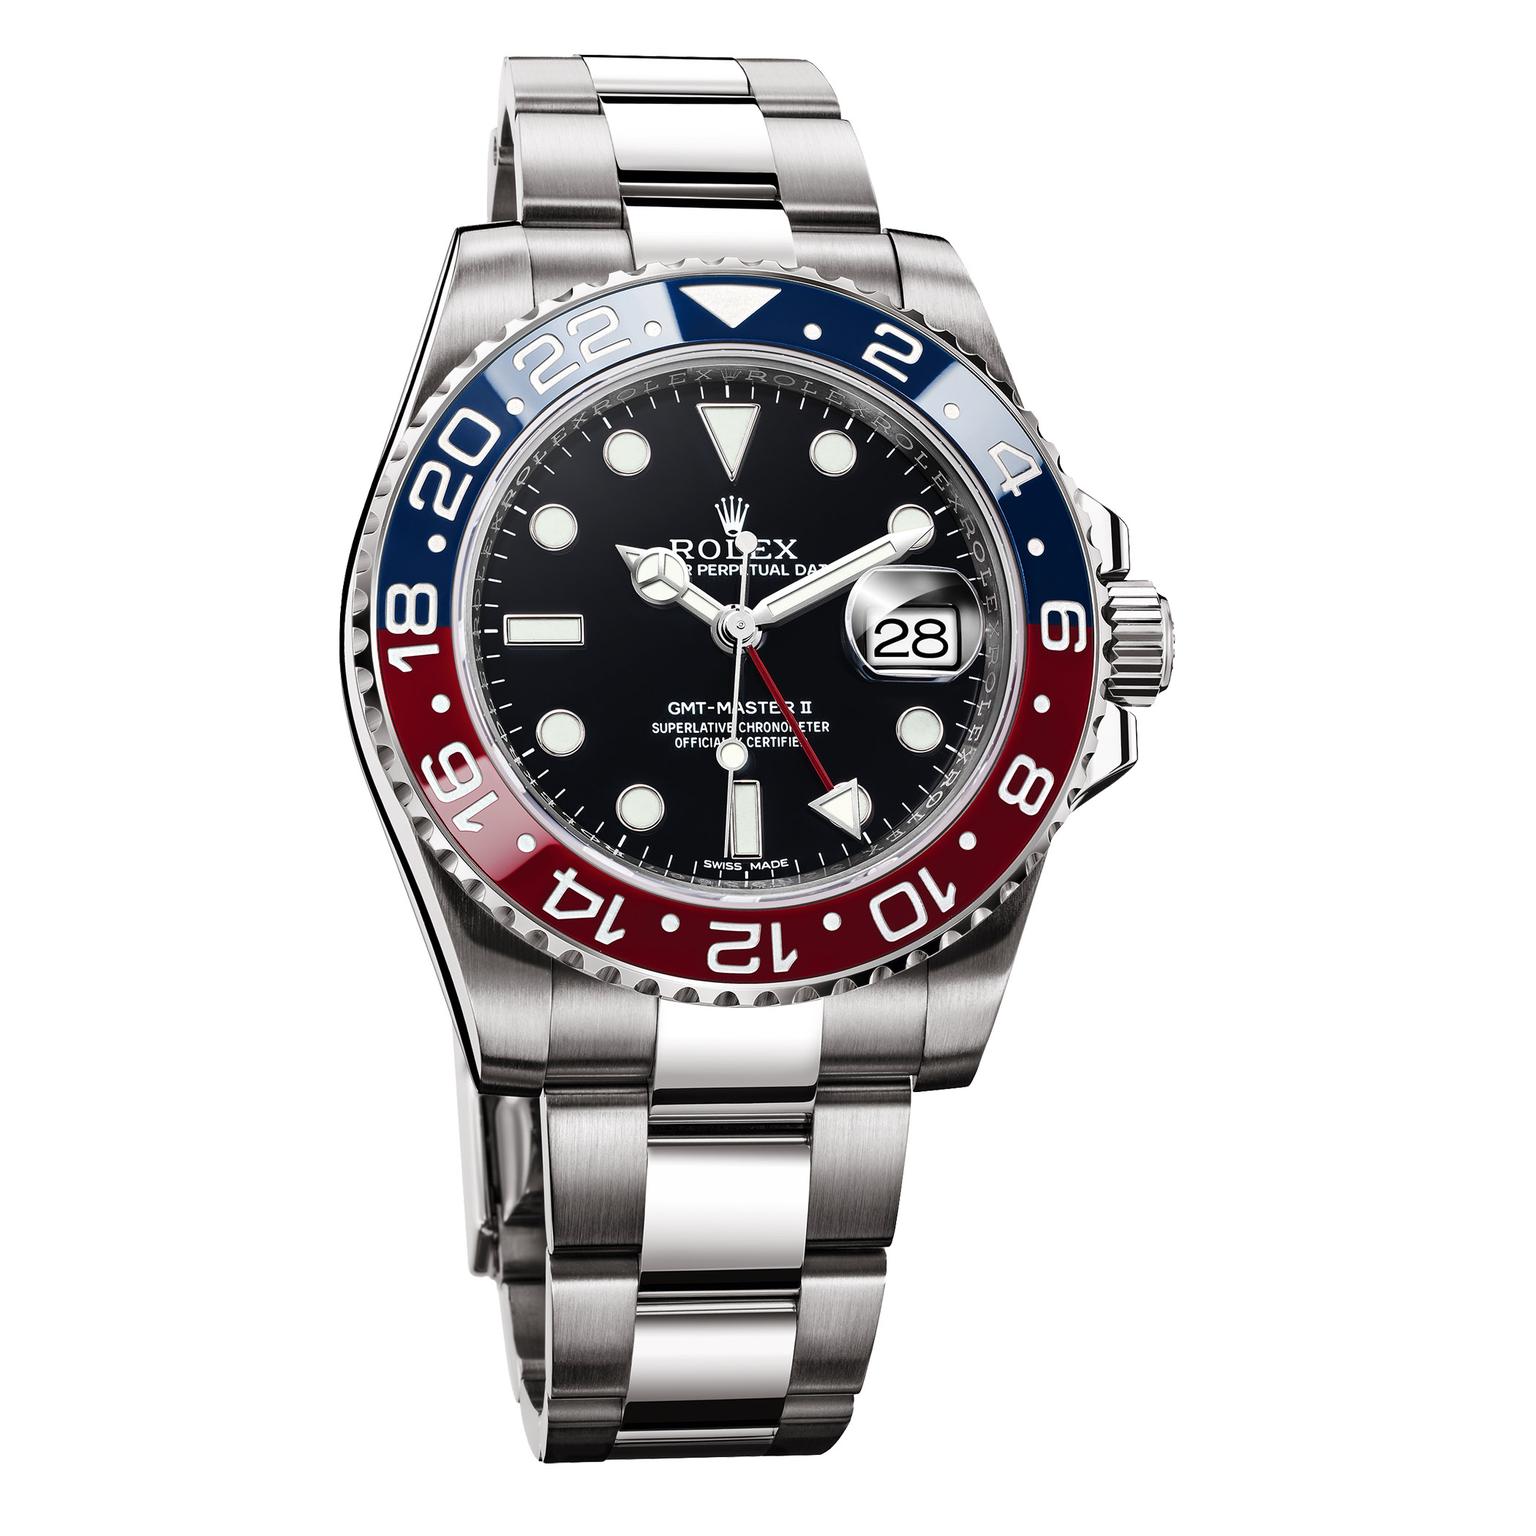 Oyster Perpetual GMT-Master II with a 